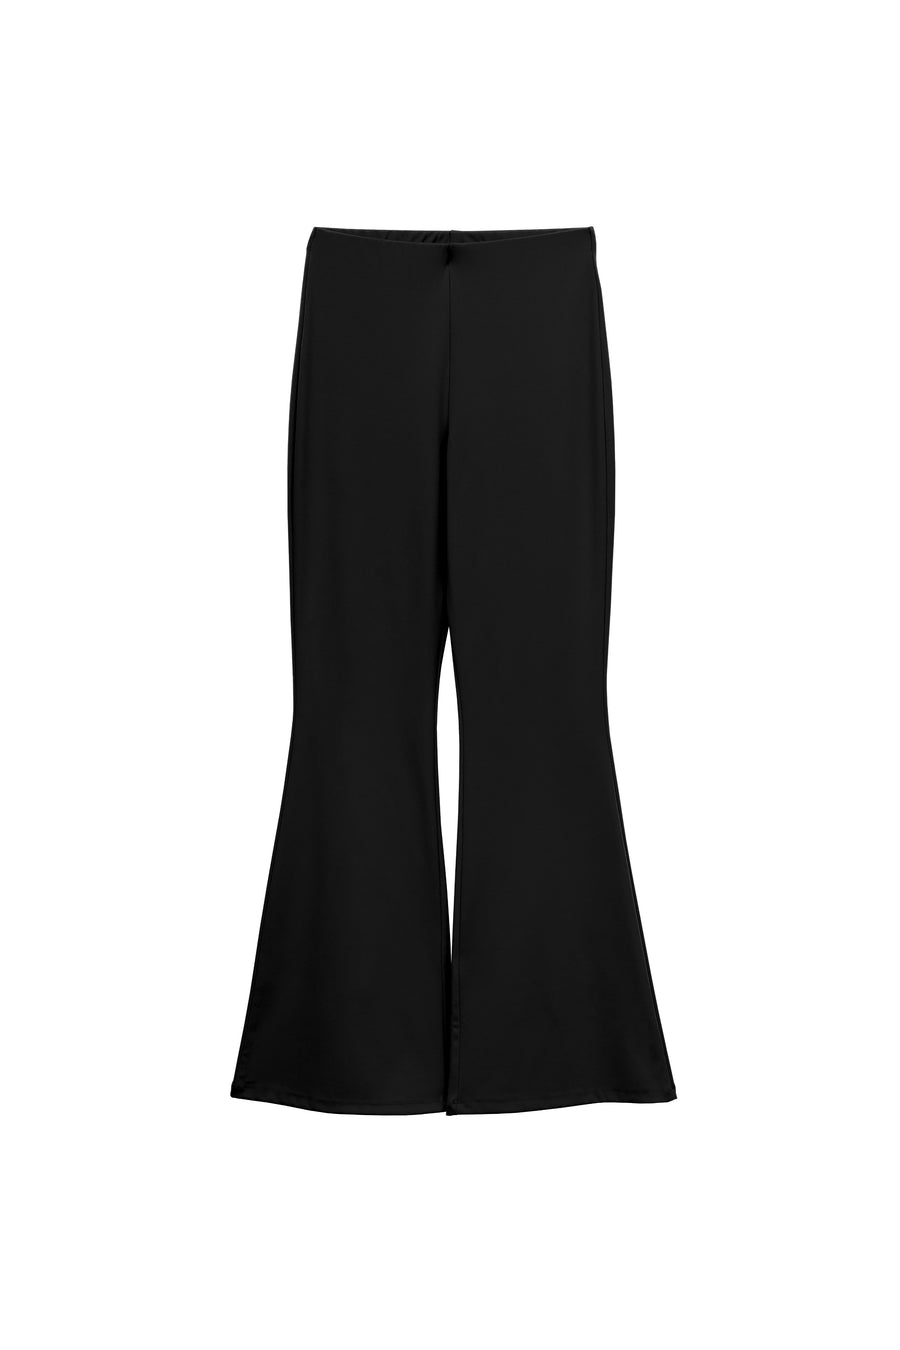 #29 THE FLARED PANTS BLACK